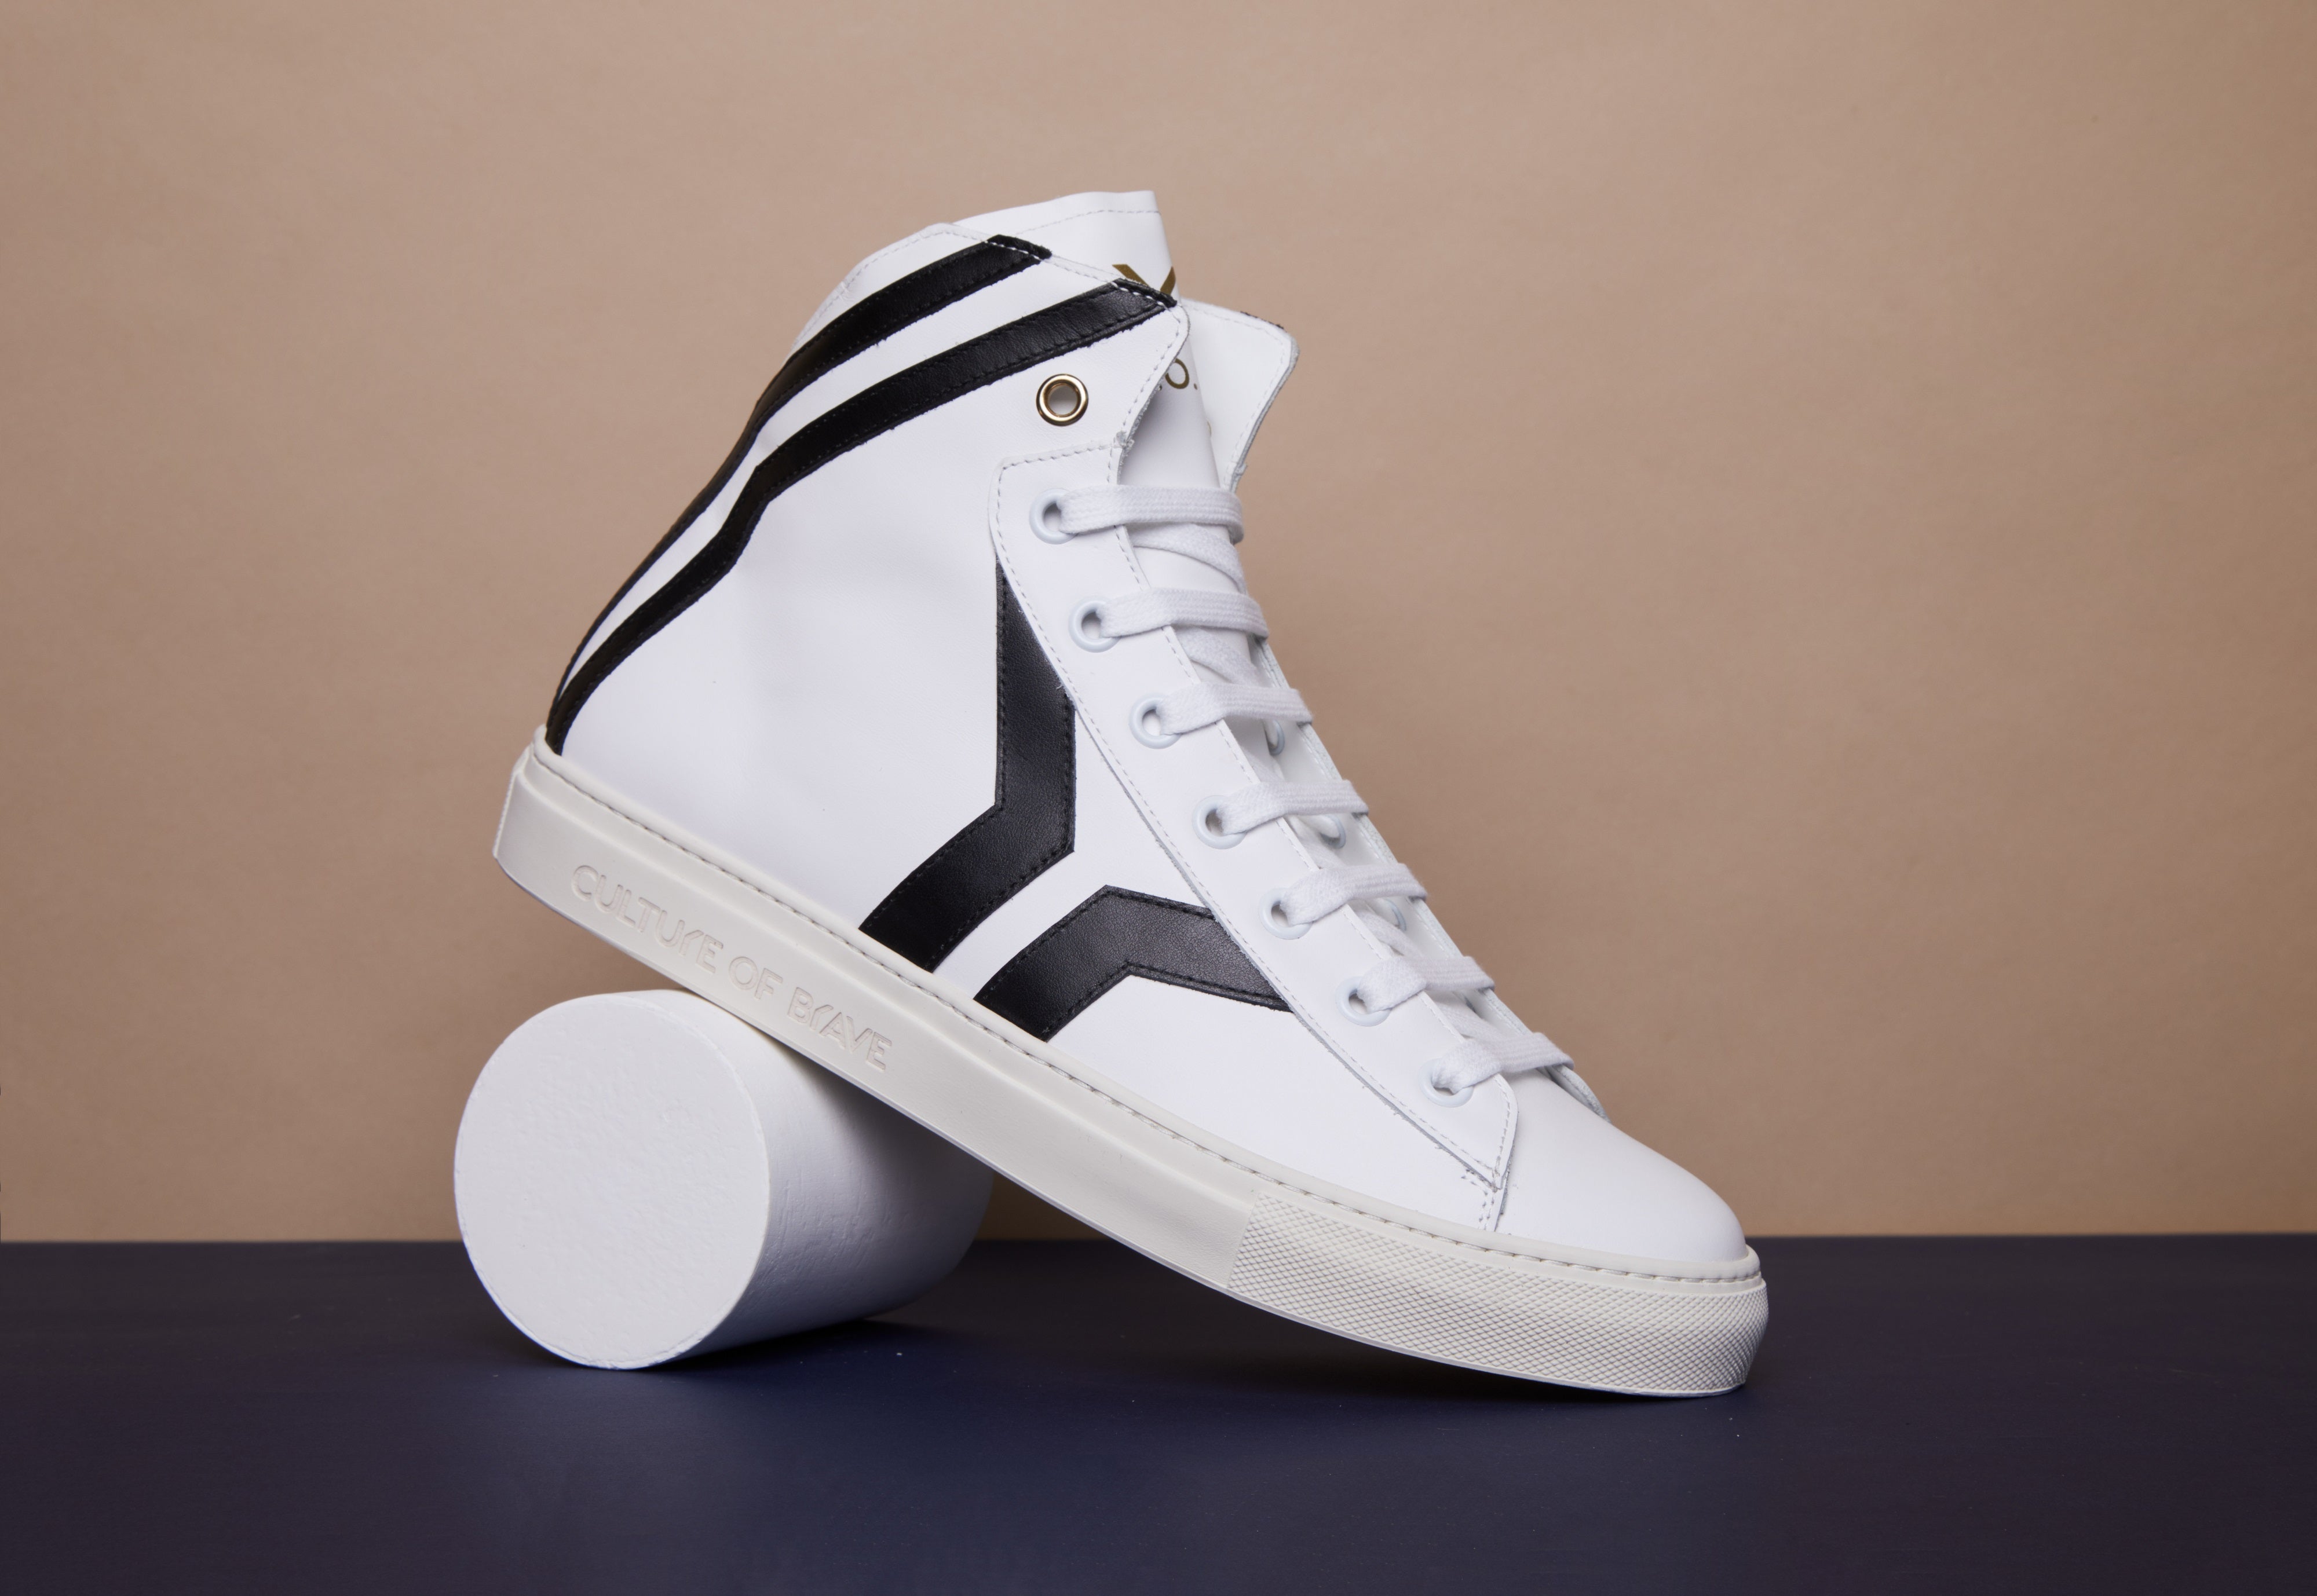 Resilient S15 Men White leather black wing mid cut